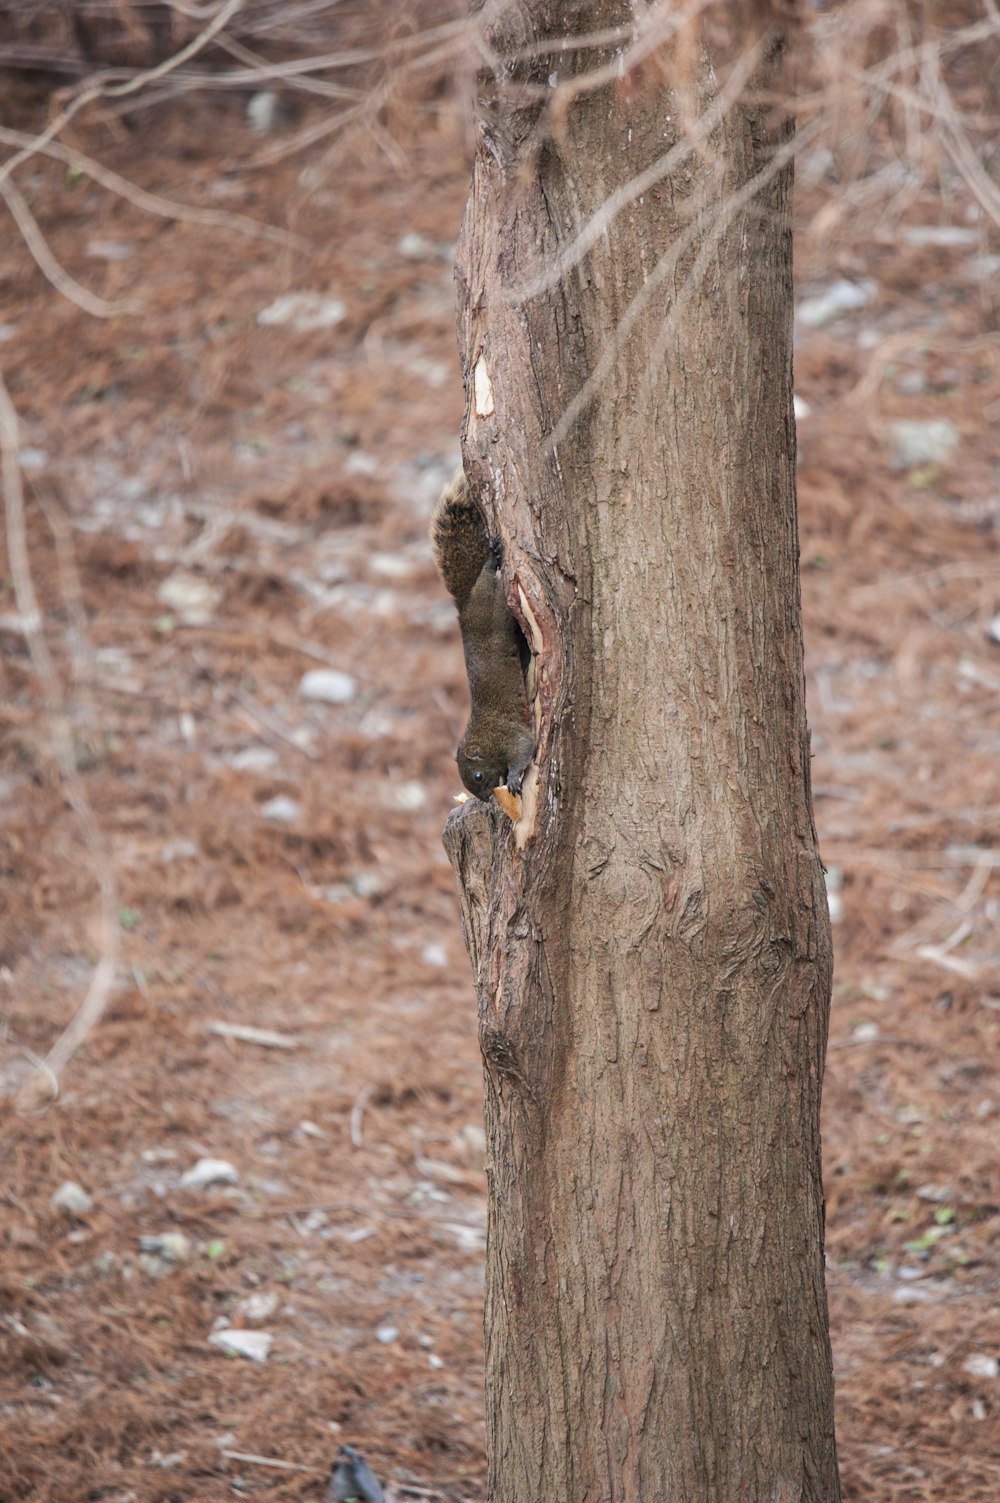 brown rodent on tree trunk